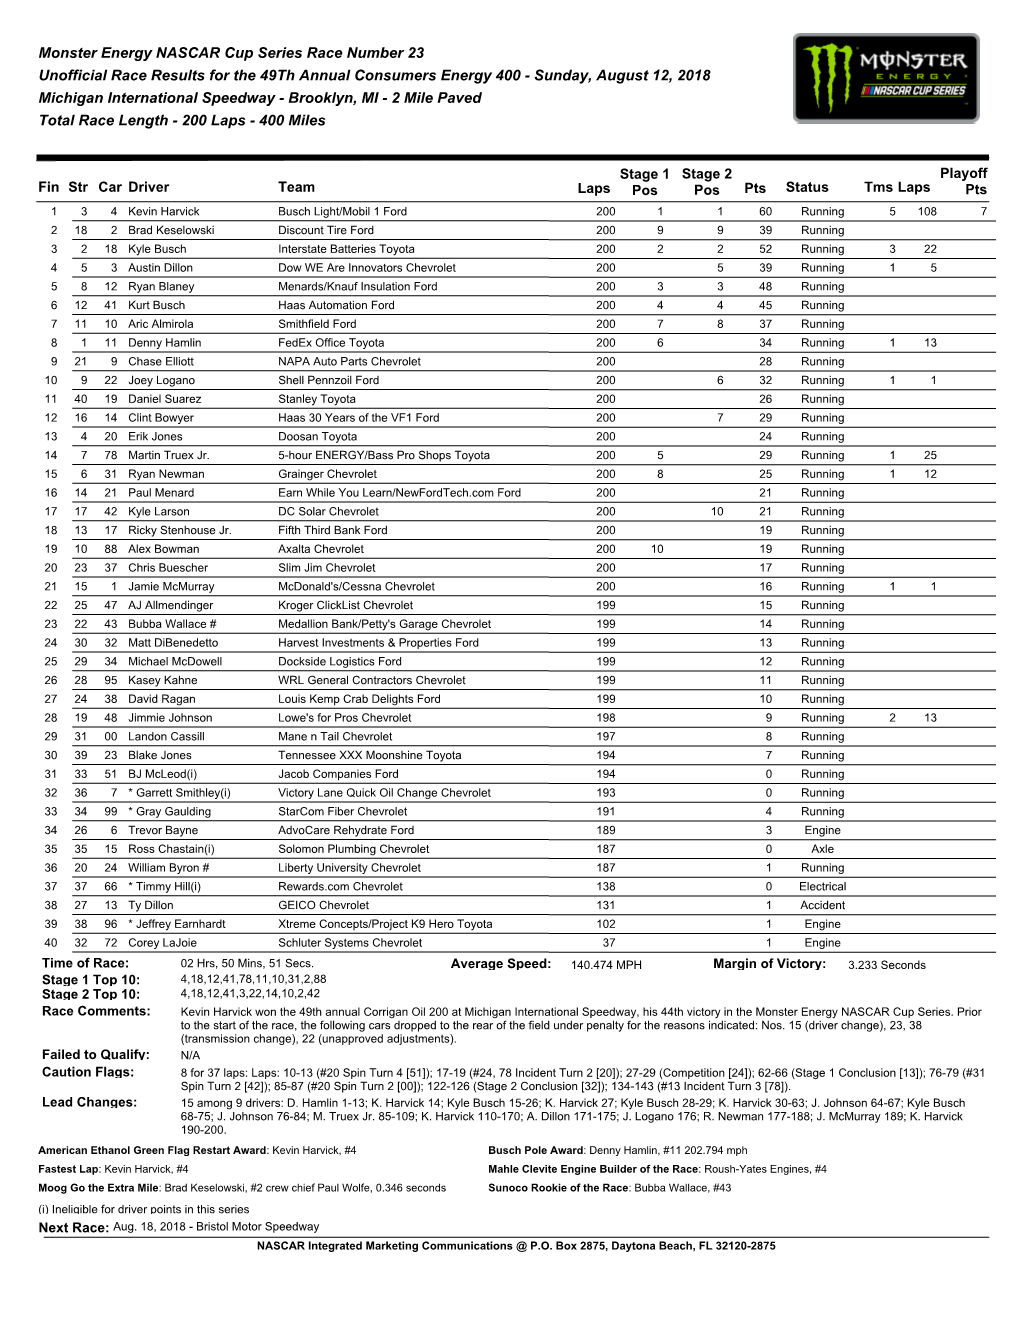 Monster Energy NASCAR Cup Series Race Number 23 Unofficial Race